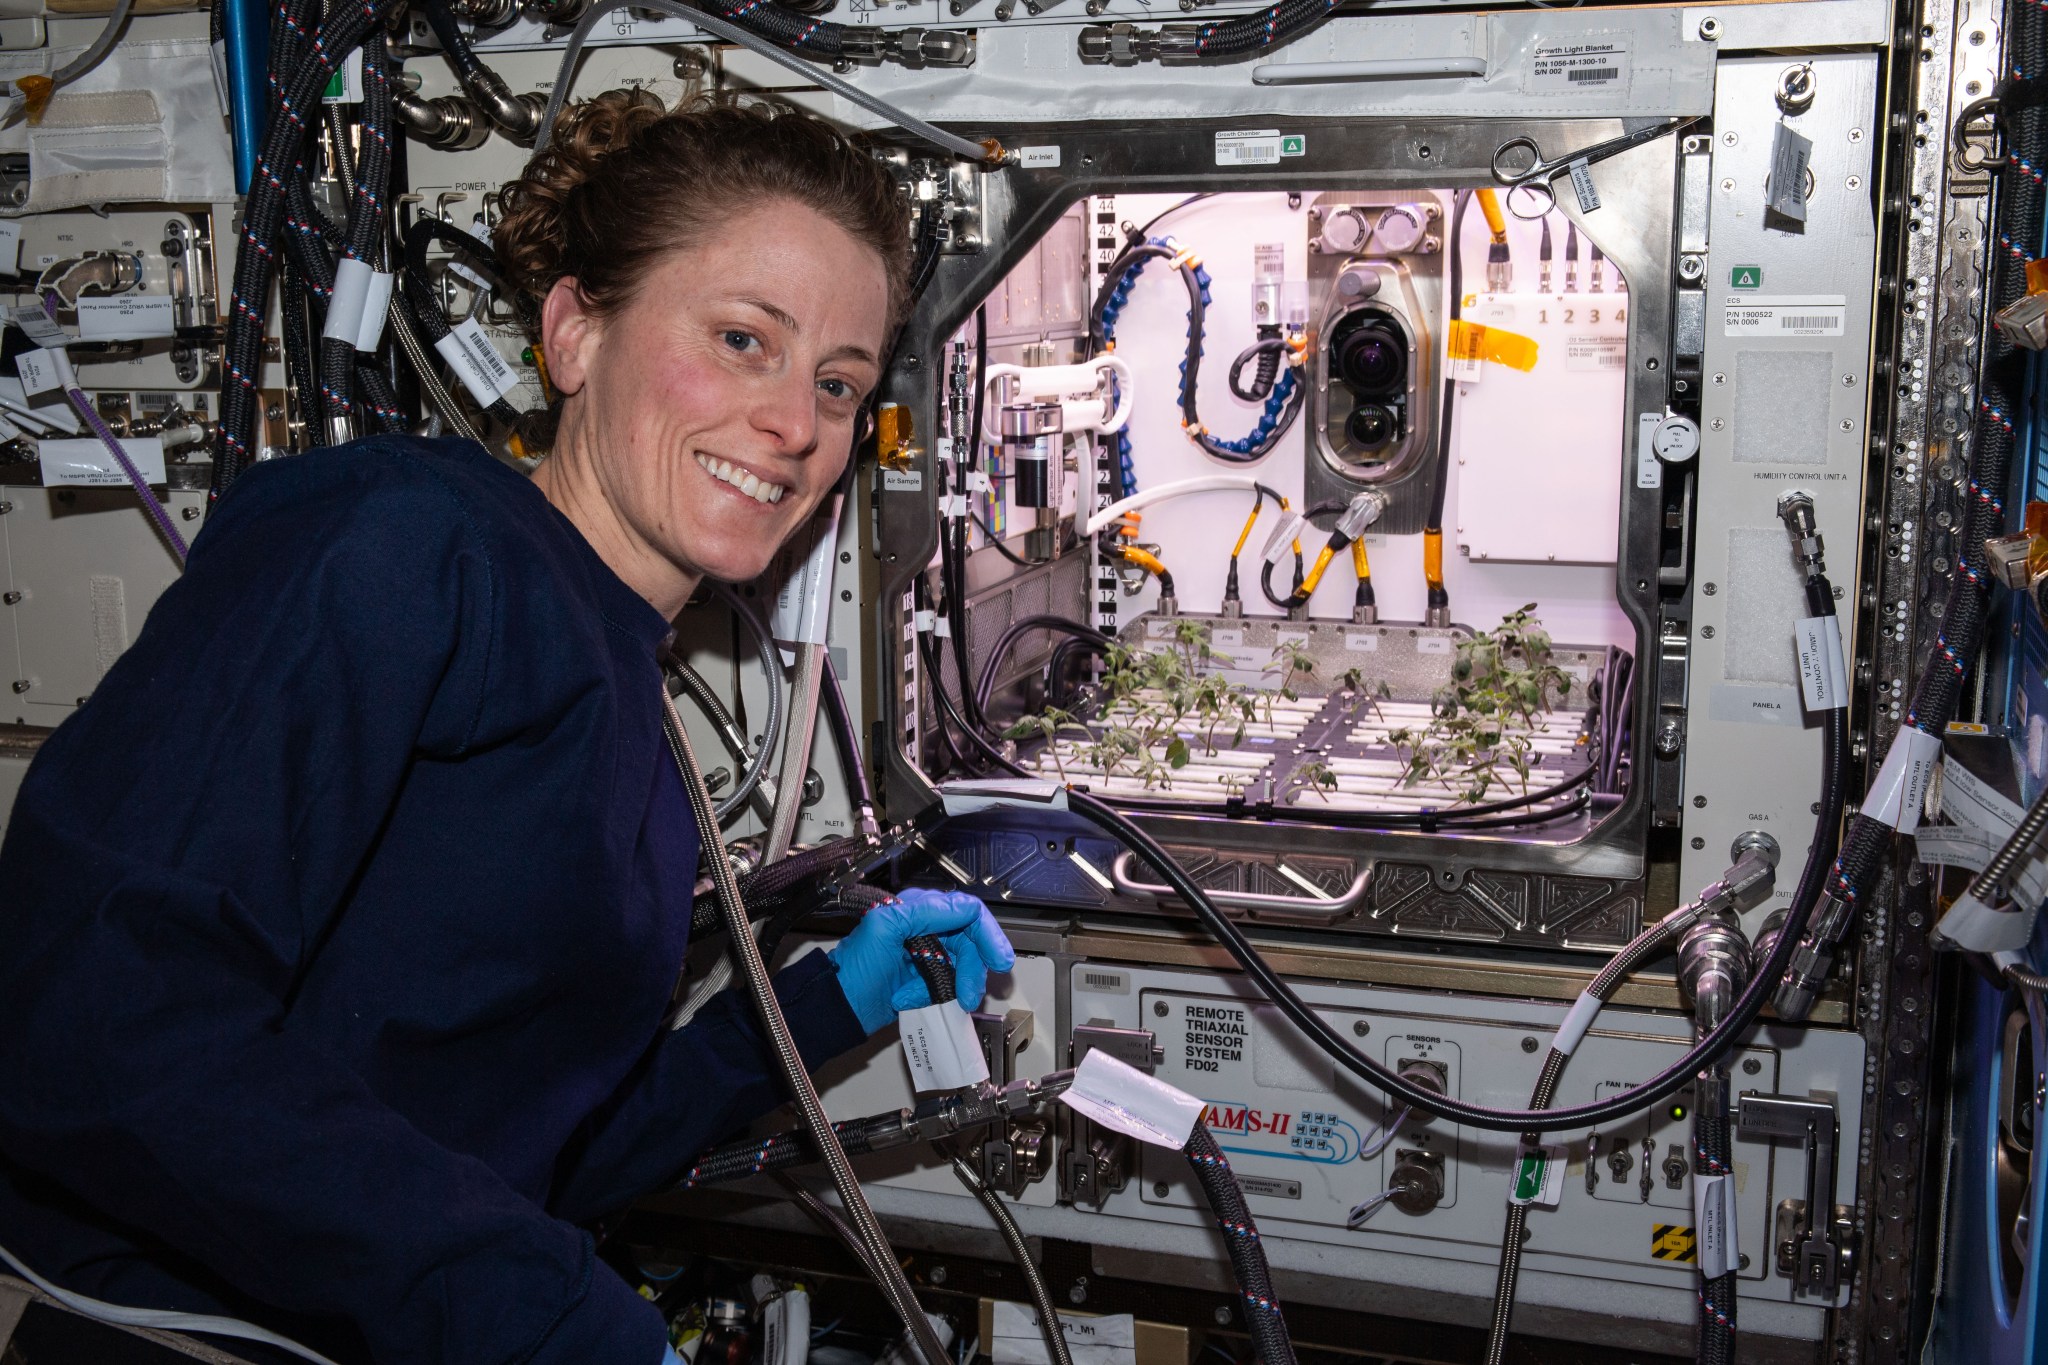 O'Hara is wearing a blue sweatshirt and light blue gloves and smiling at the camera. She has one hand on a tube connected to a large metal box that is lighted inside. The front of the box is open and inside multiple rows of small green plants are visible.